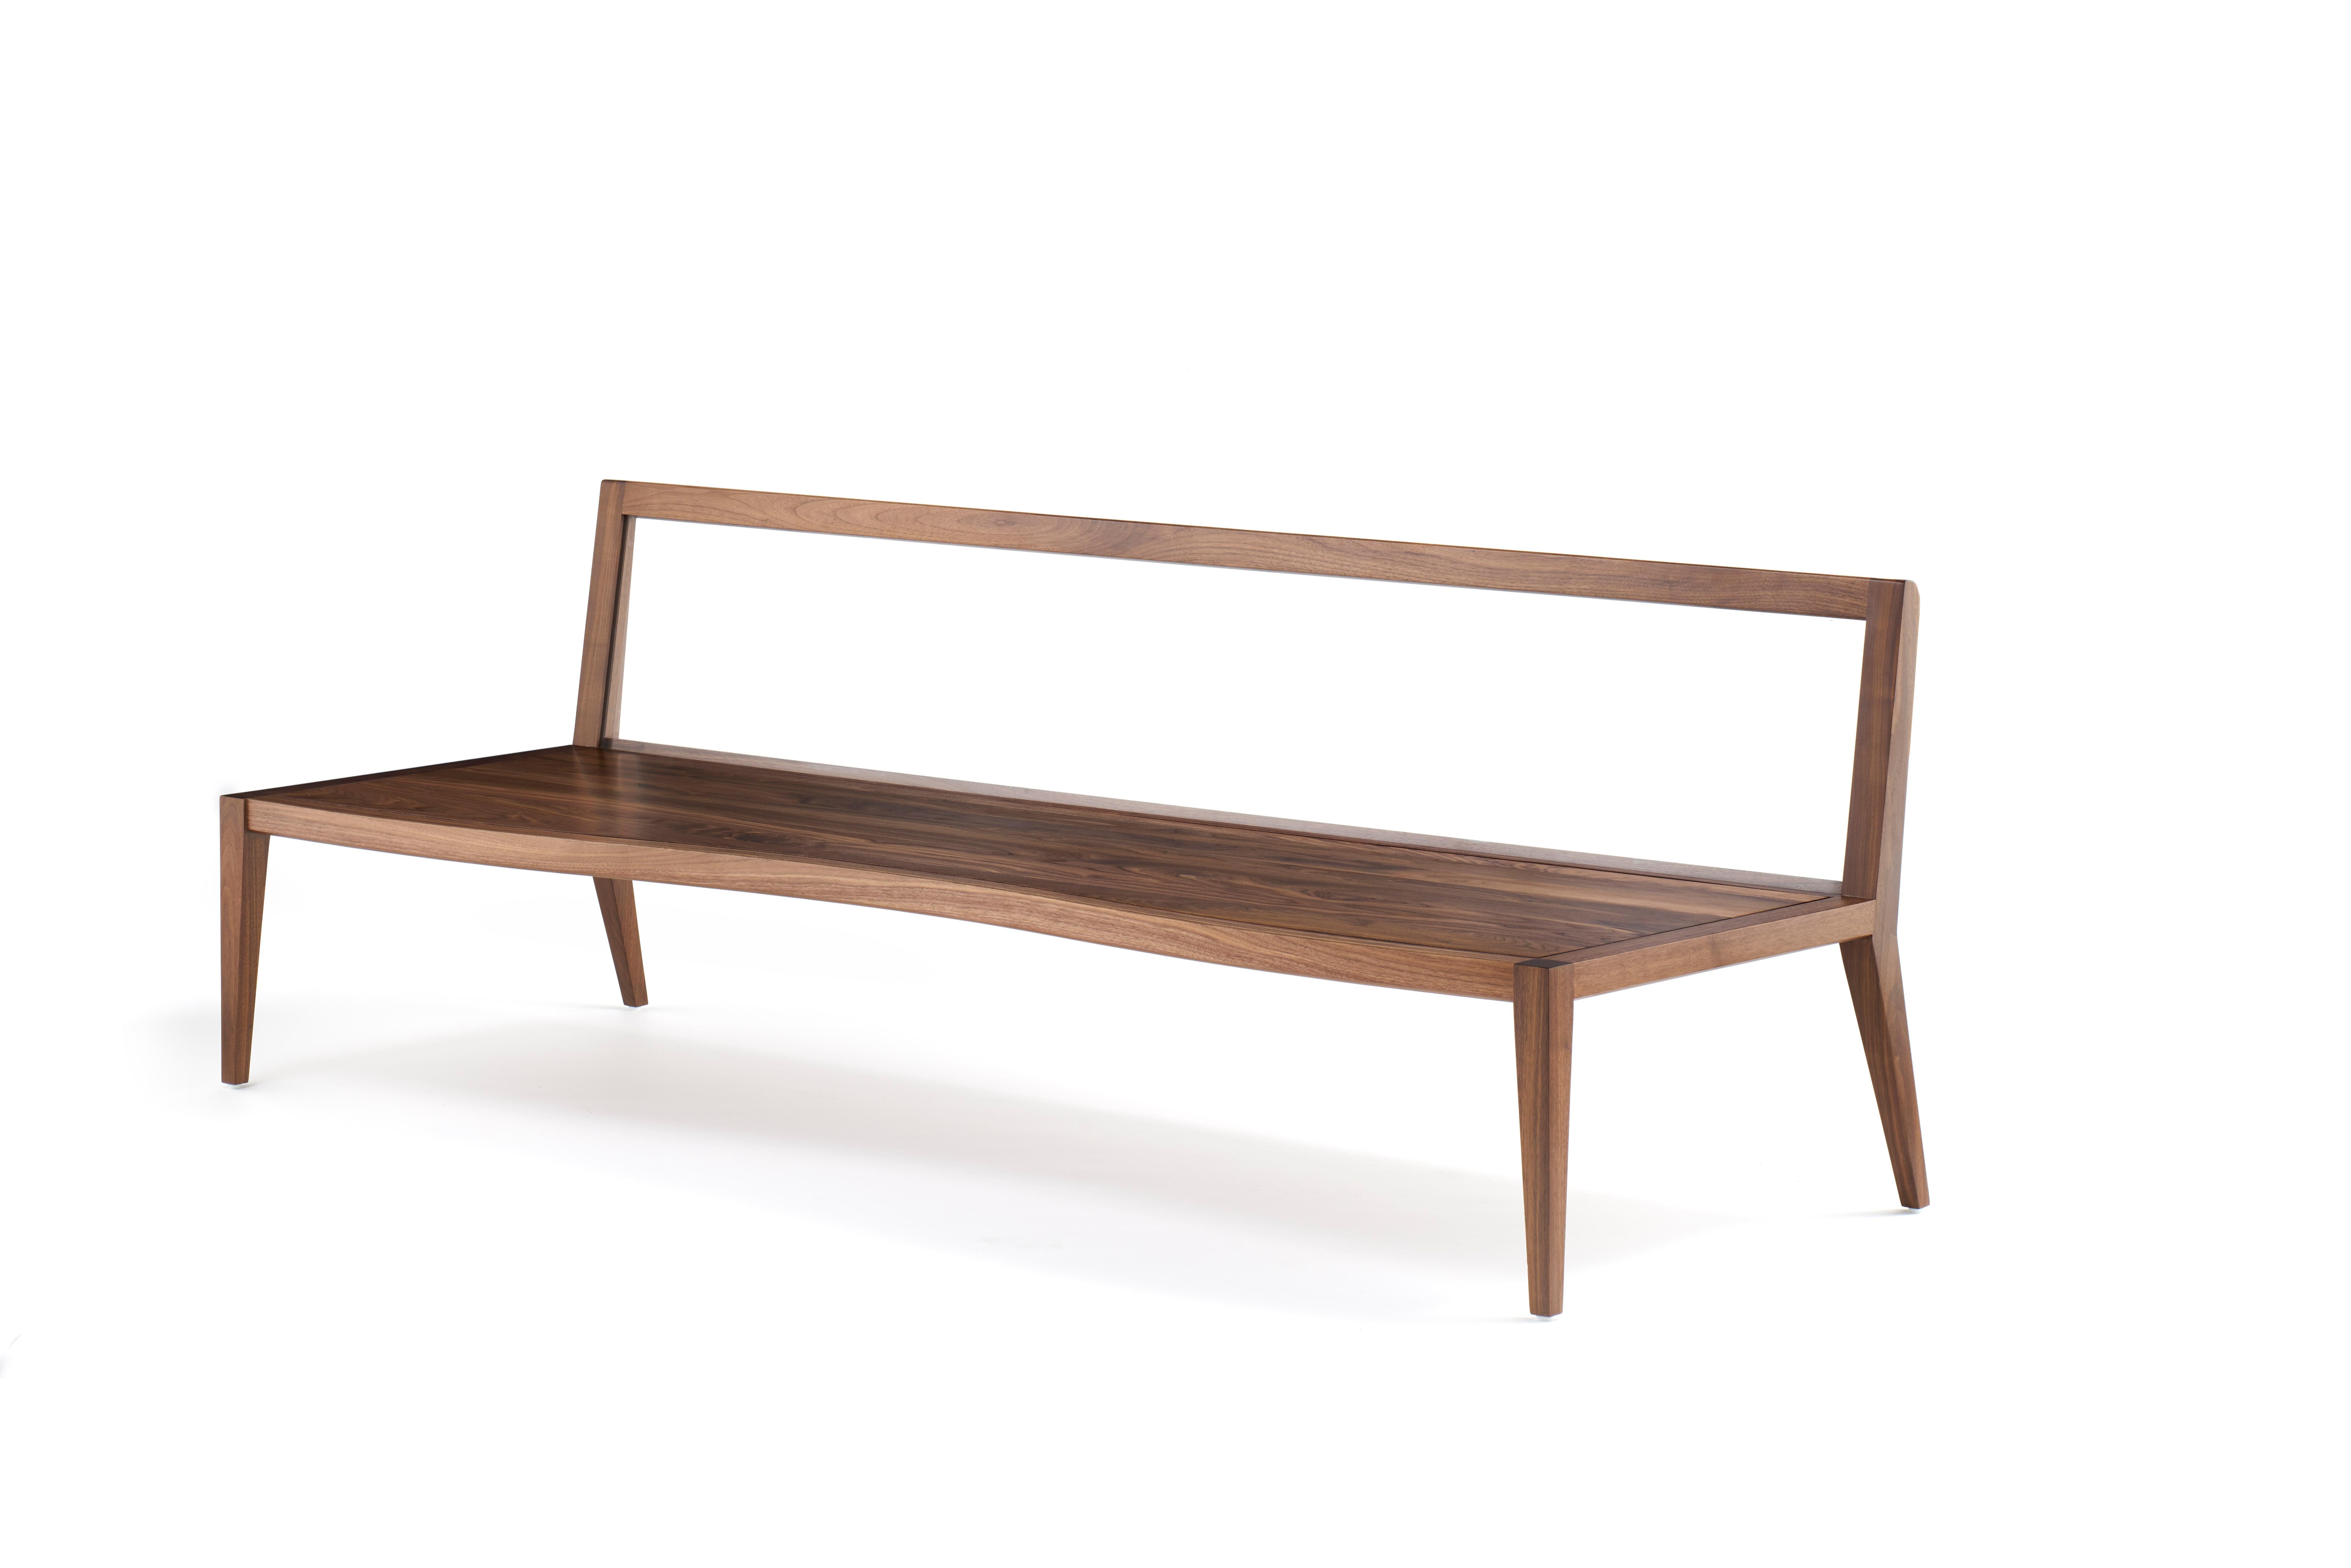 No. BCH-003

The Wood Float Bench blurs the lines between art and furniture. Handcrafted from solid walnut, the seat is elegantly curved in contrast with the structured back, which is supported by transparent acrylic and acts as an interactive